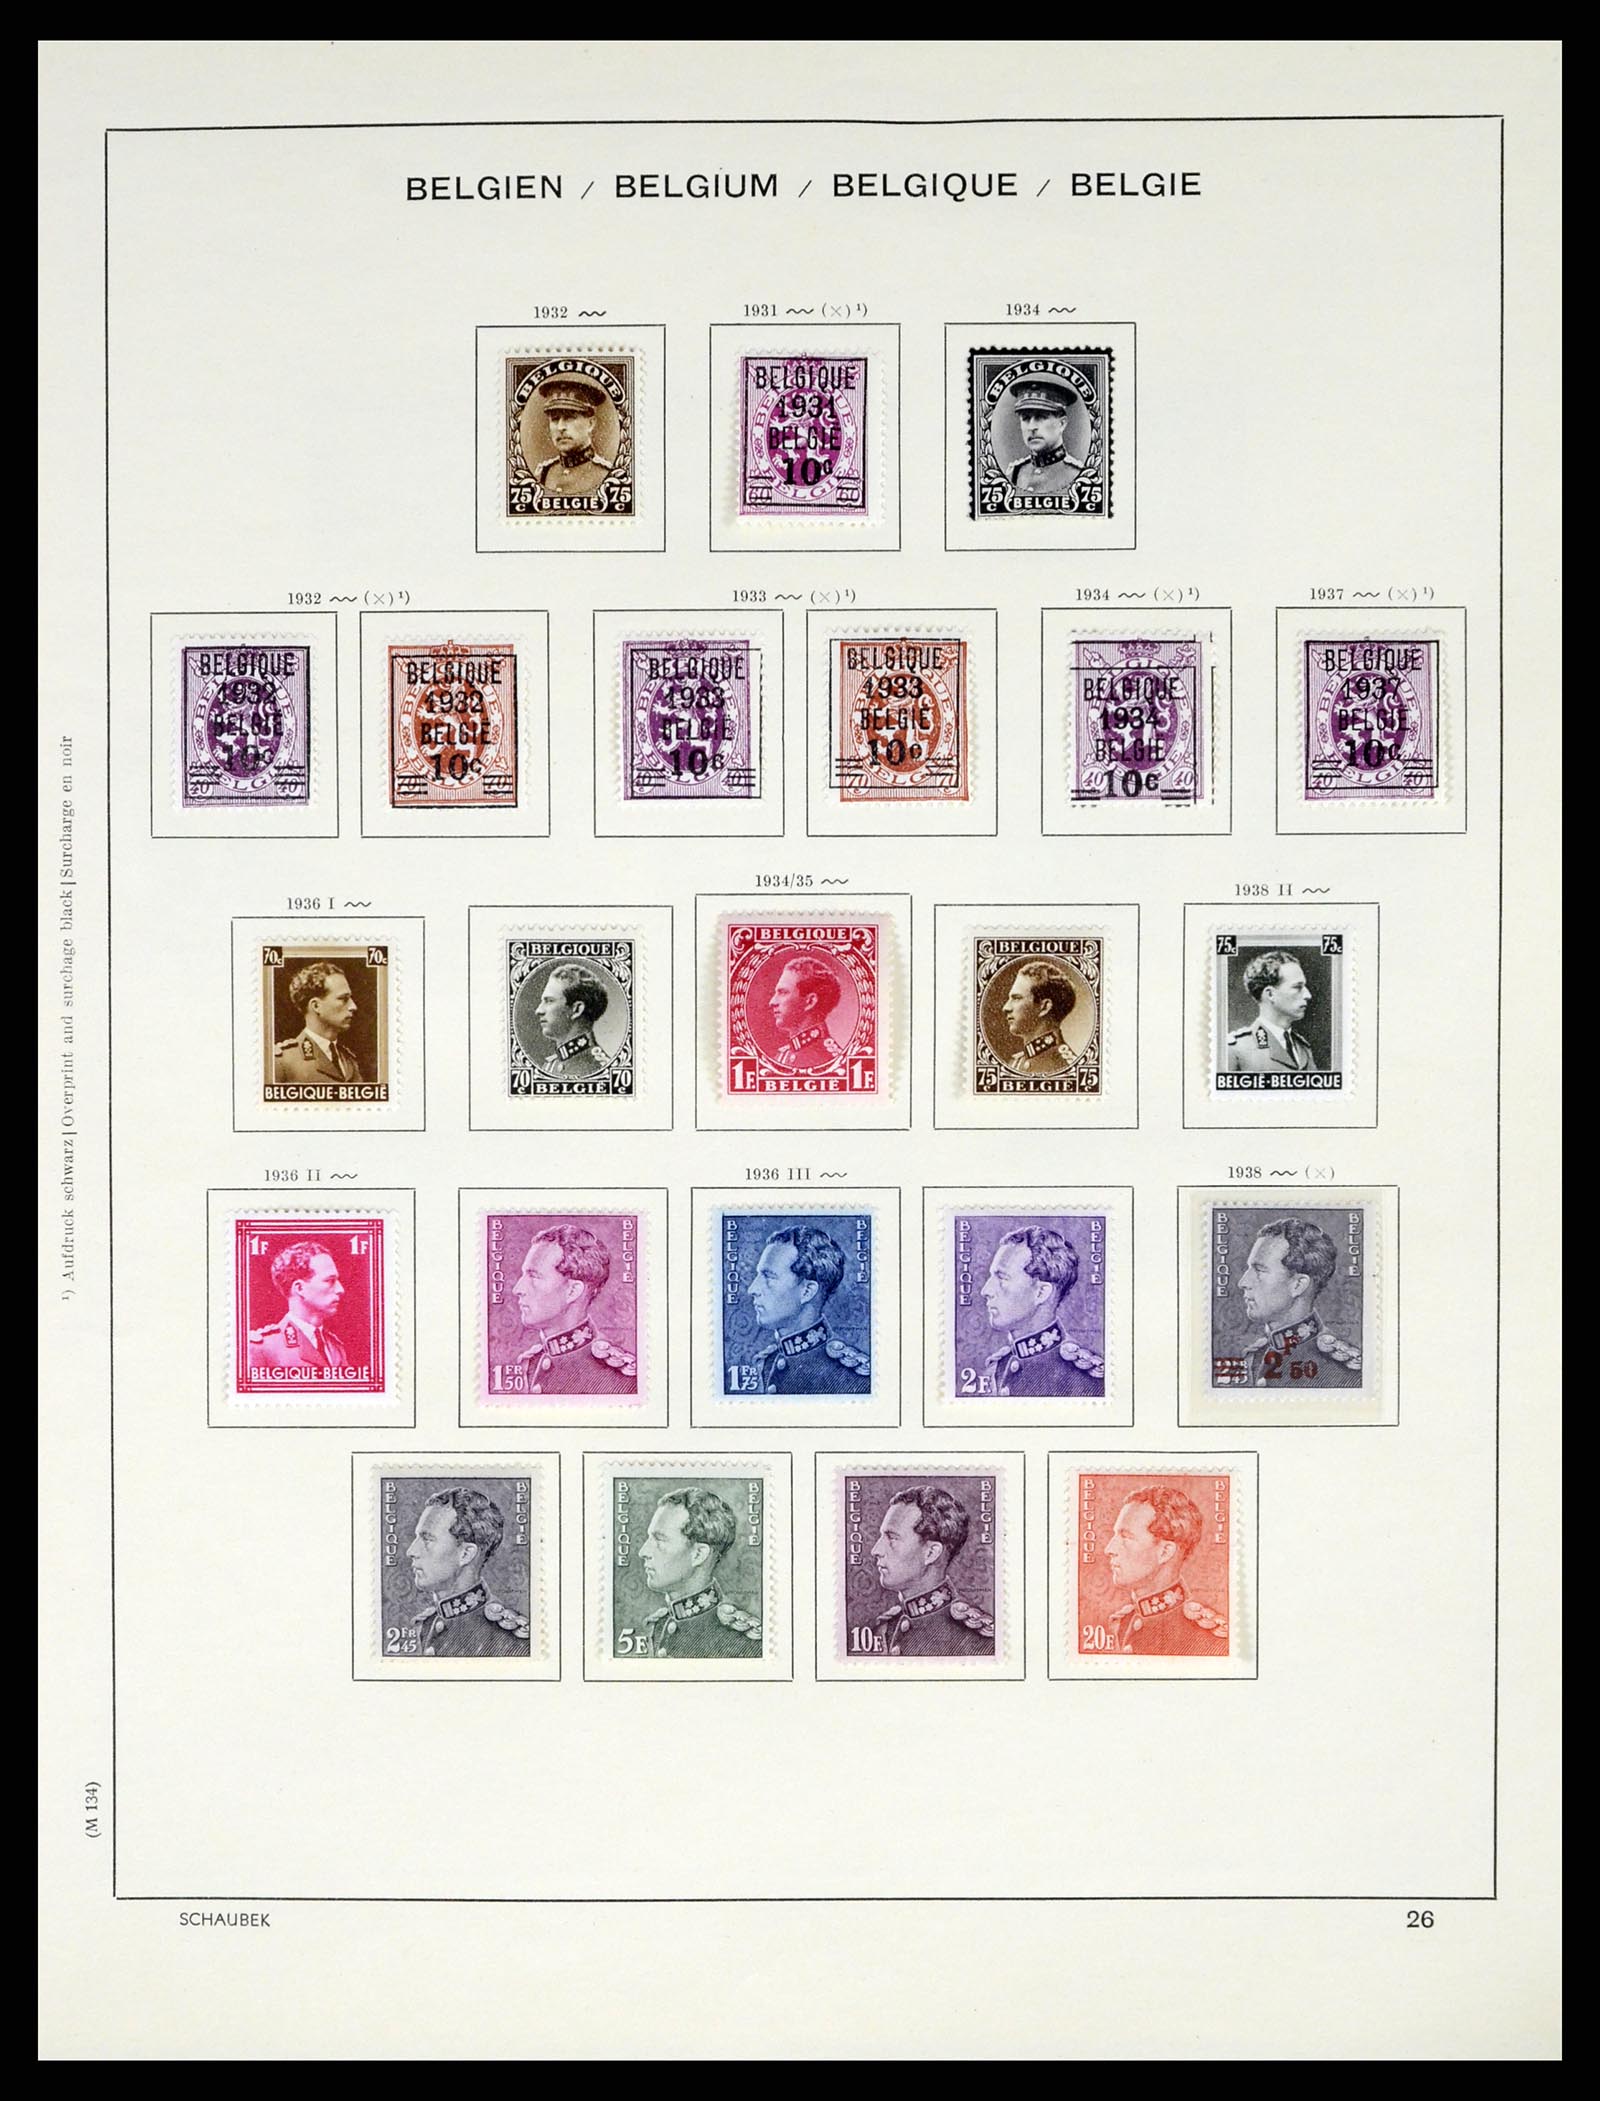 37595 023 - Stamp collection 37595 Super collection Belgium 1849-2015!